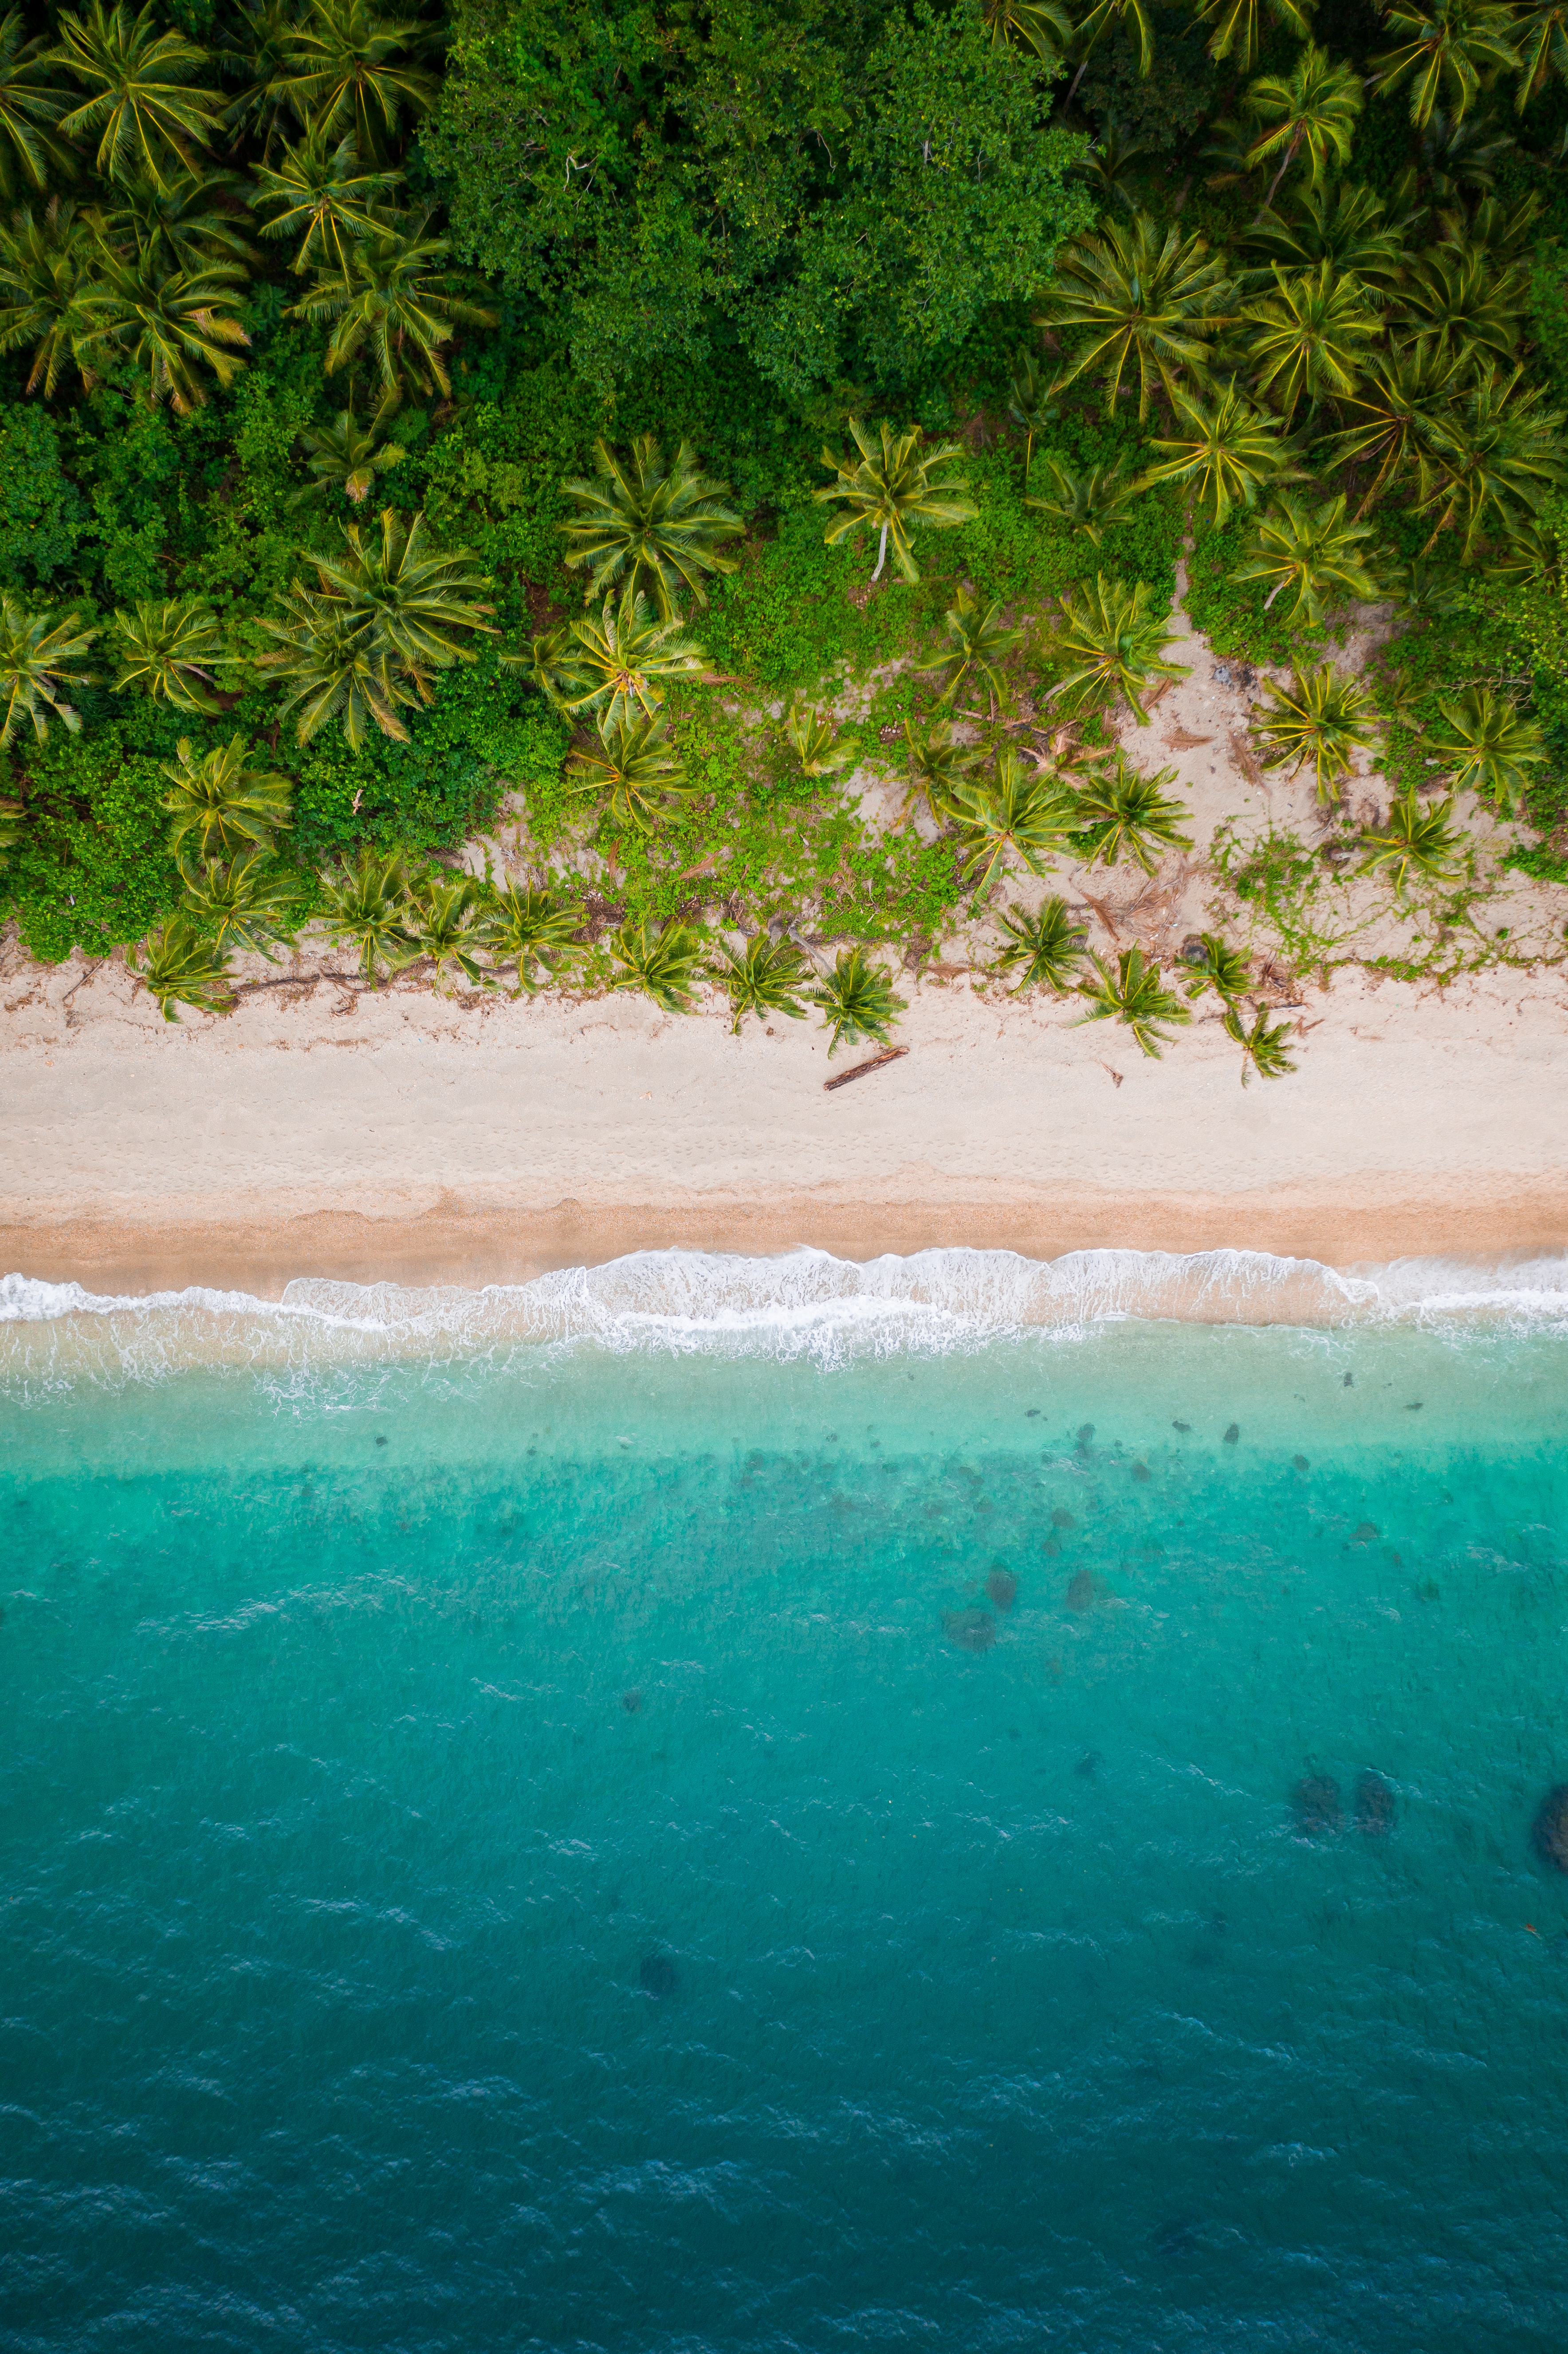 bank, view from above, nature, beach, palms, sand, shore